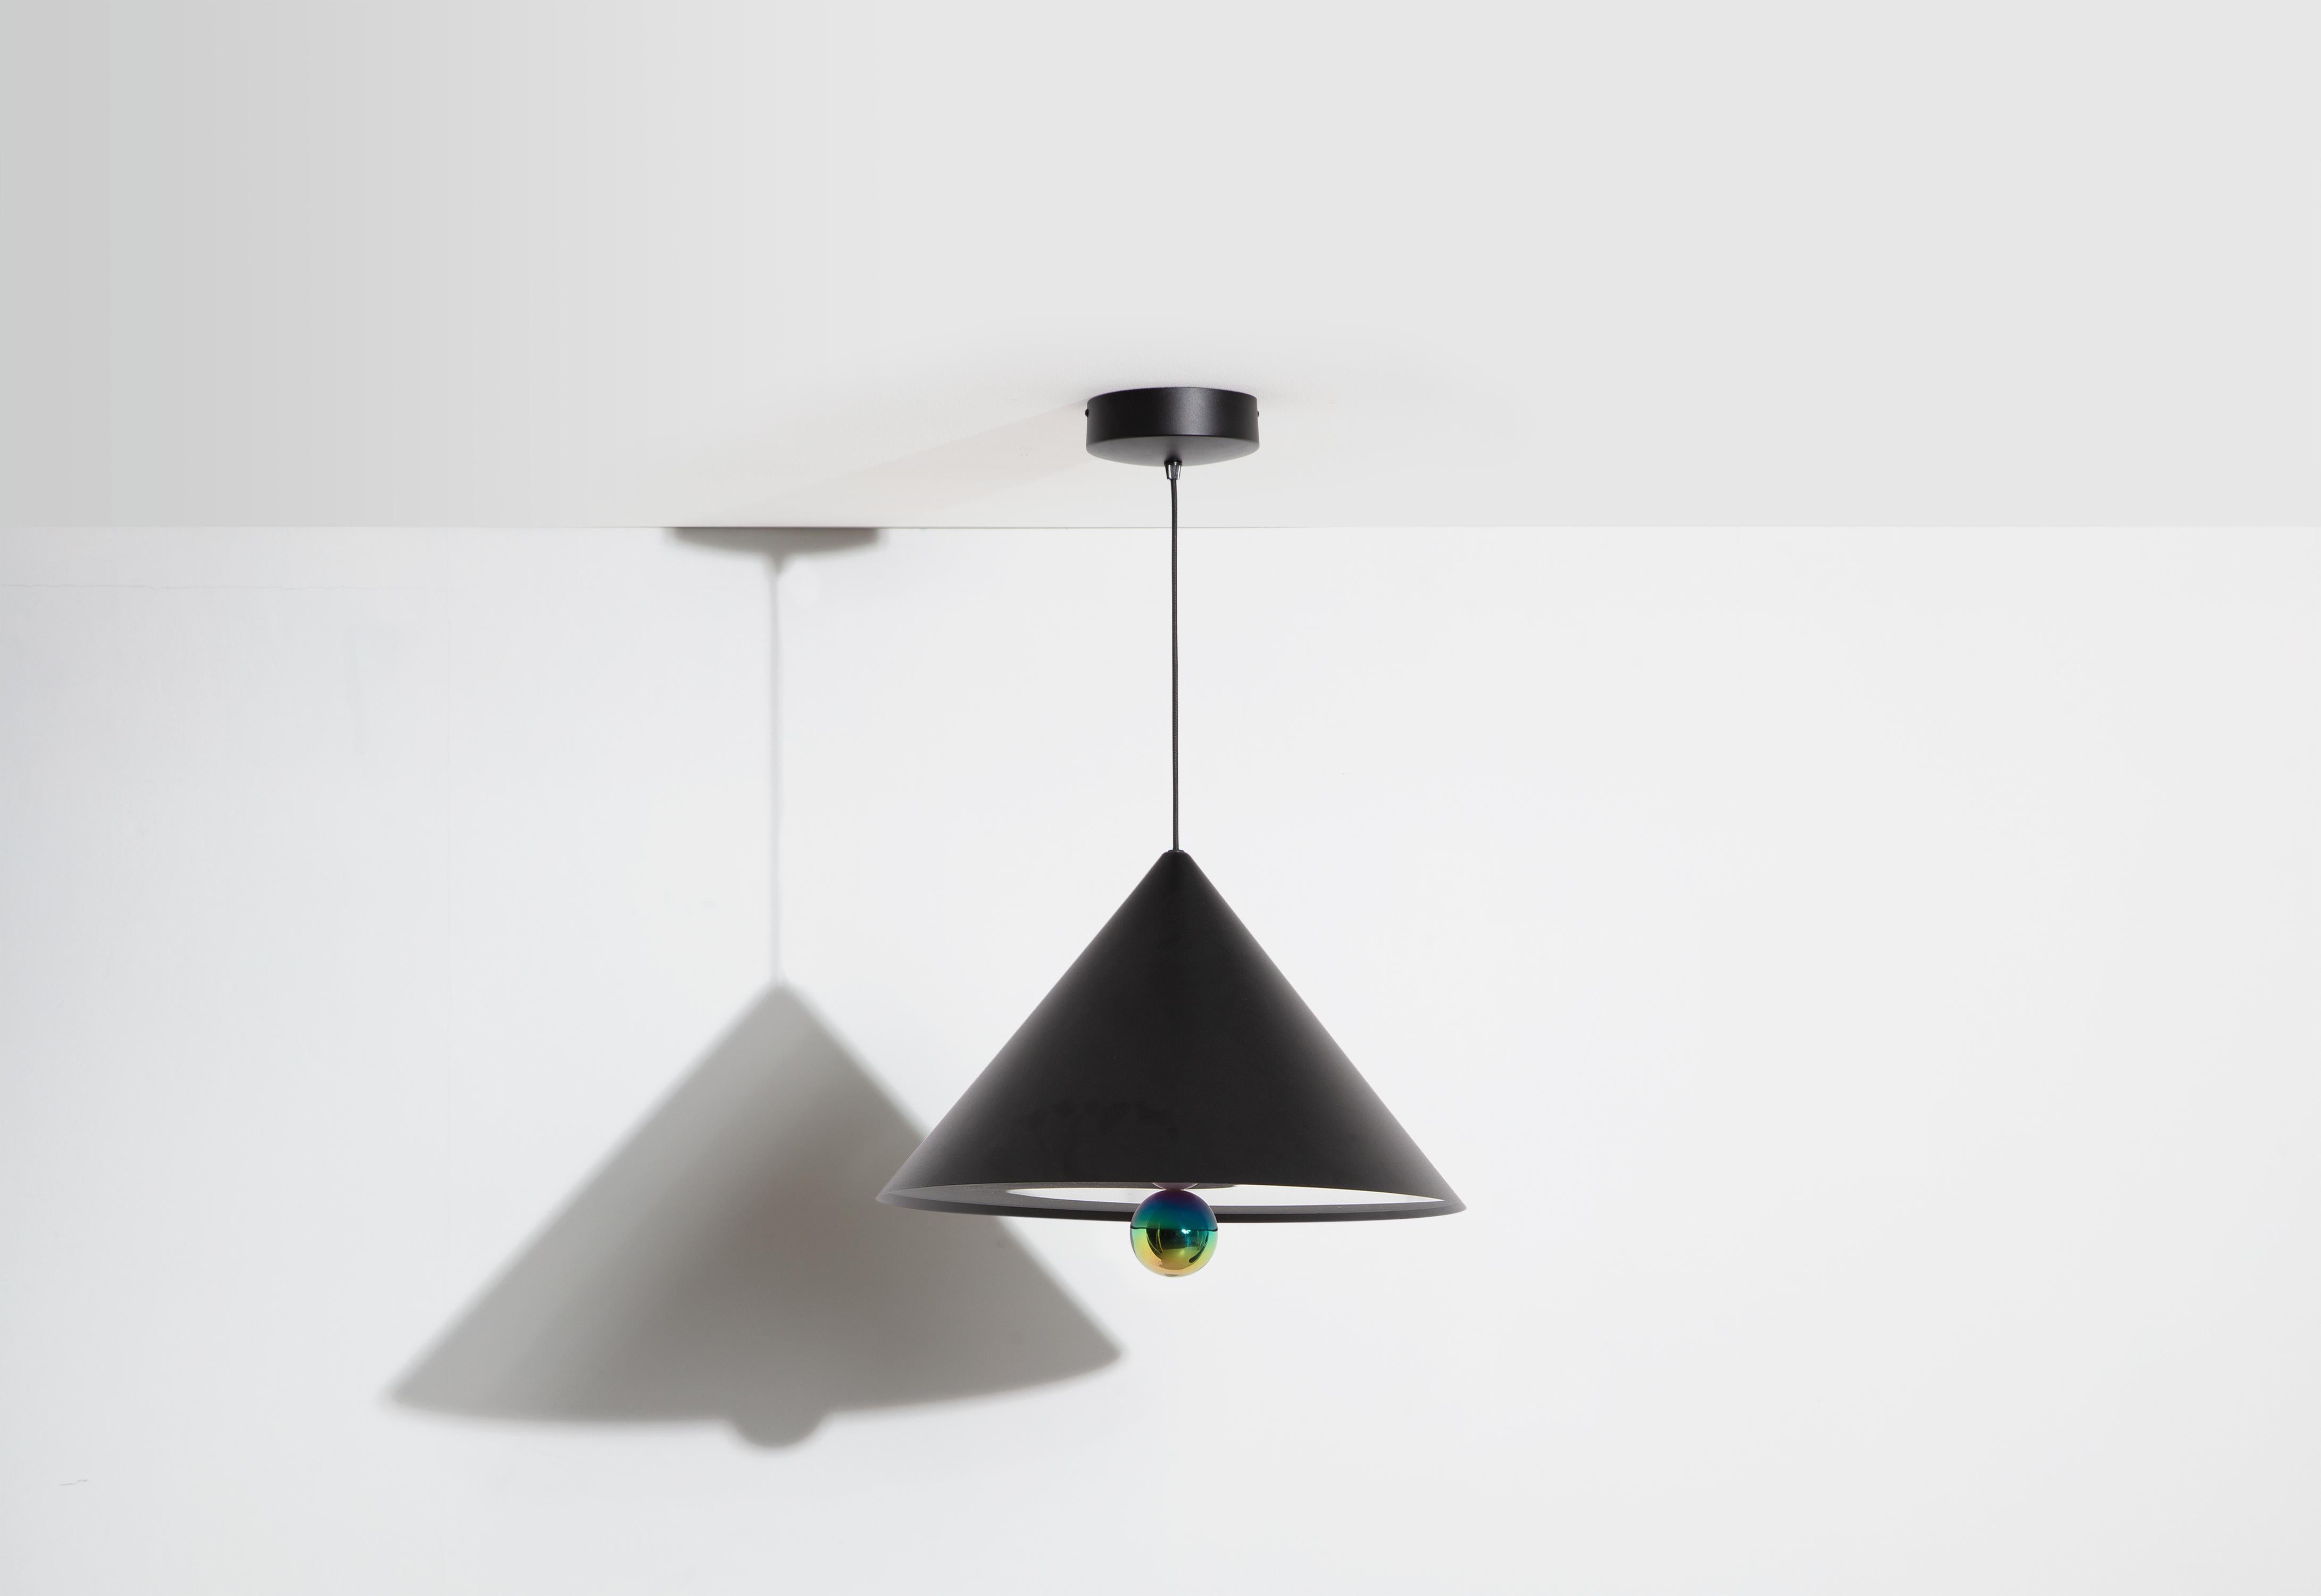 Petite Friture Large Cherry LED Pendant Light in Black & Rainbow Aluminium by Daniel and Emma, 2020

In 2015, the Australian duo designers Daniel and Emma signed Cherry a simple and minimalist pendant lamp design ; an aluminum cone with a bottomed